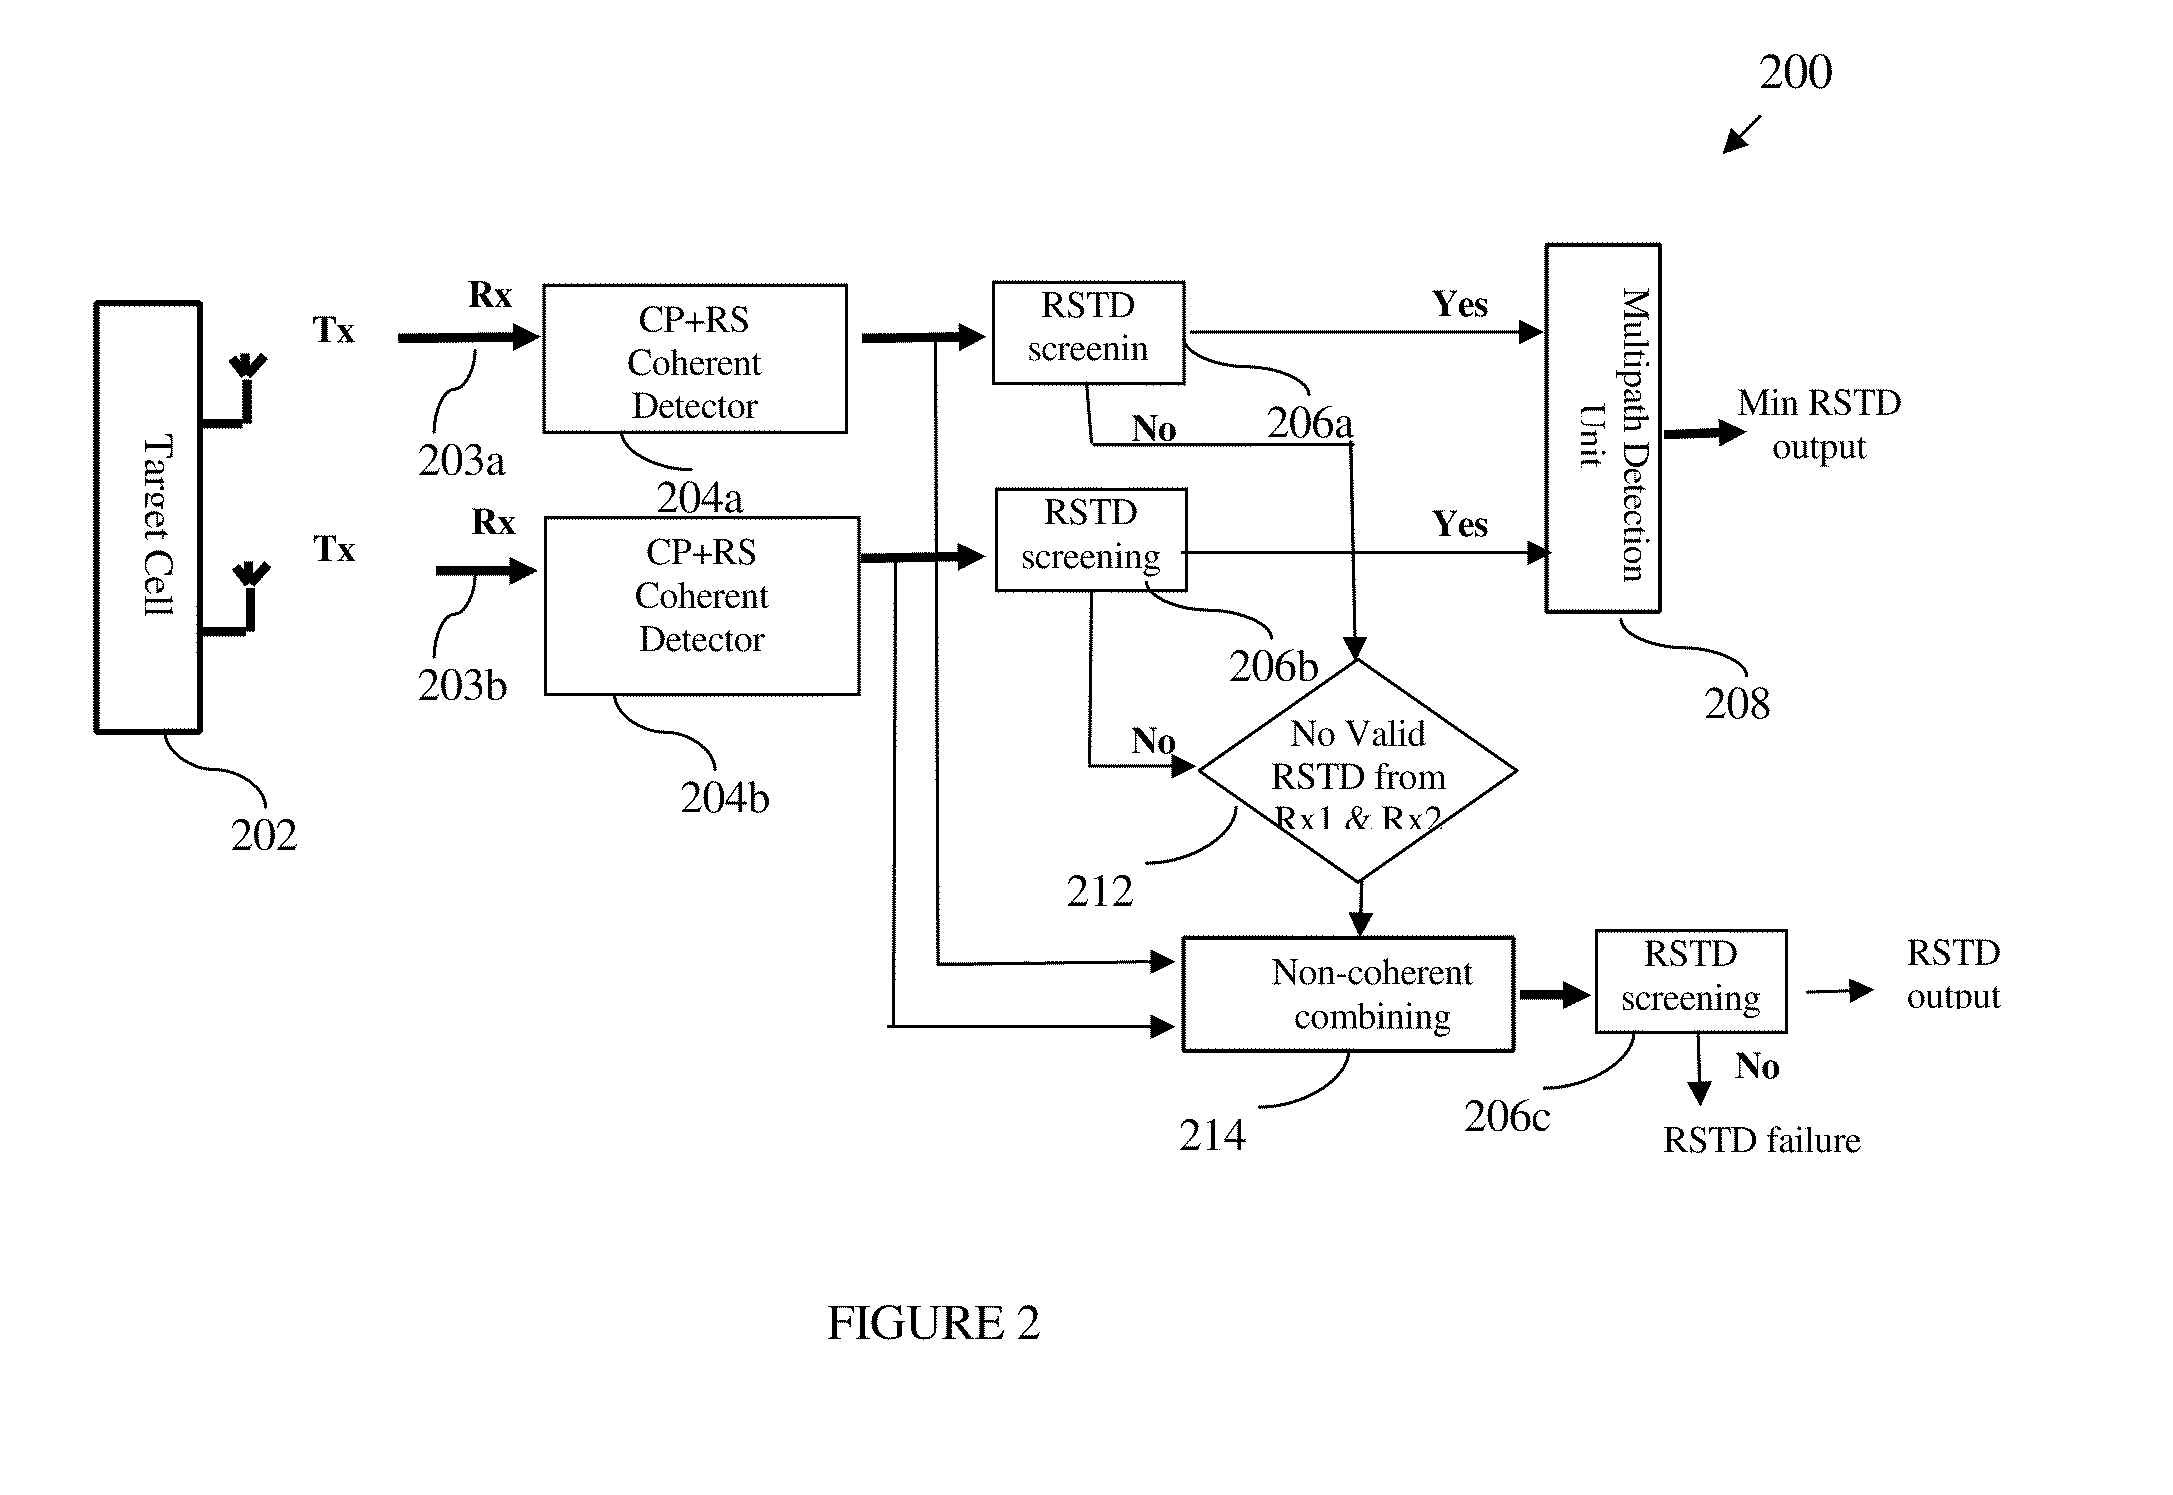 Apparatus and method for positioning a wireless user equipment